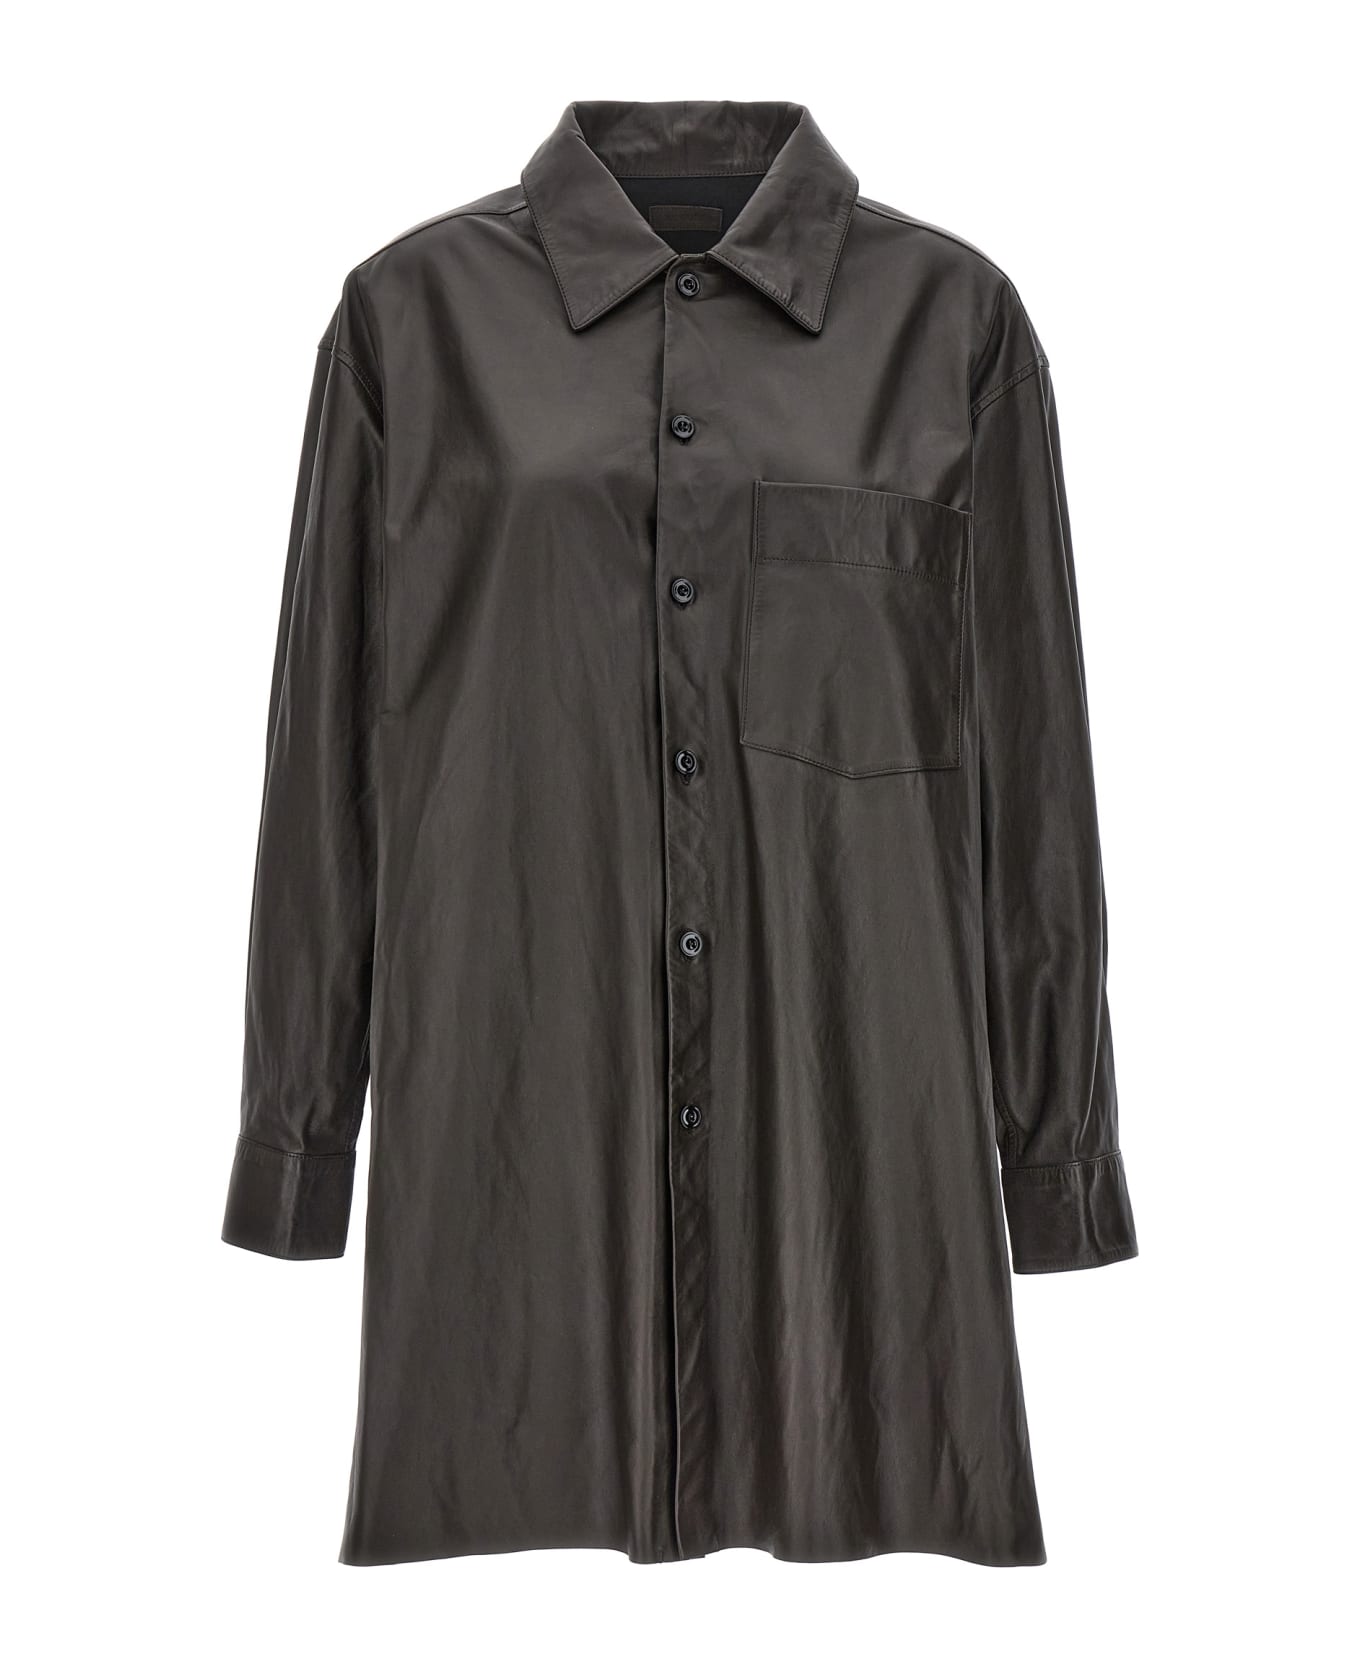 Lemaire Nappa Leather Overshirt - BROWN シャツ